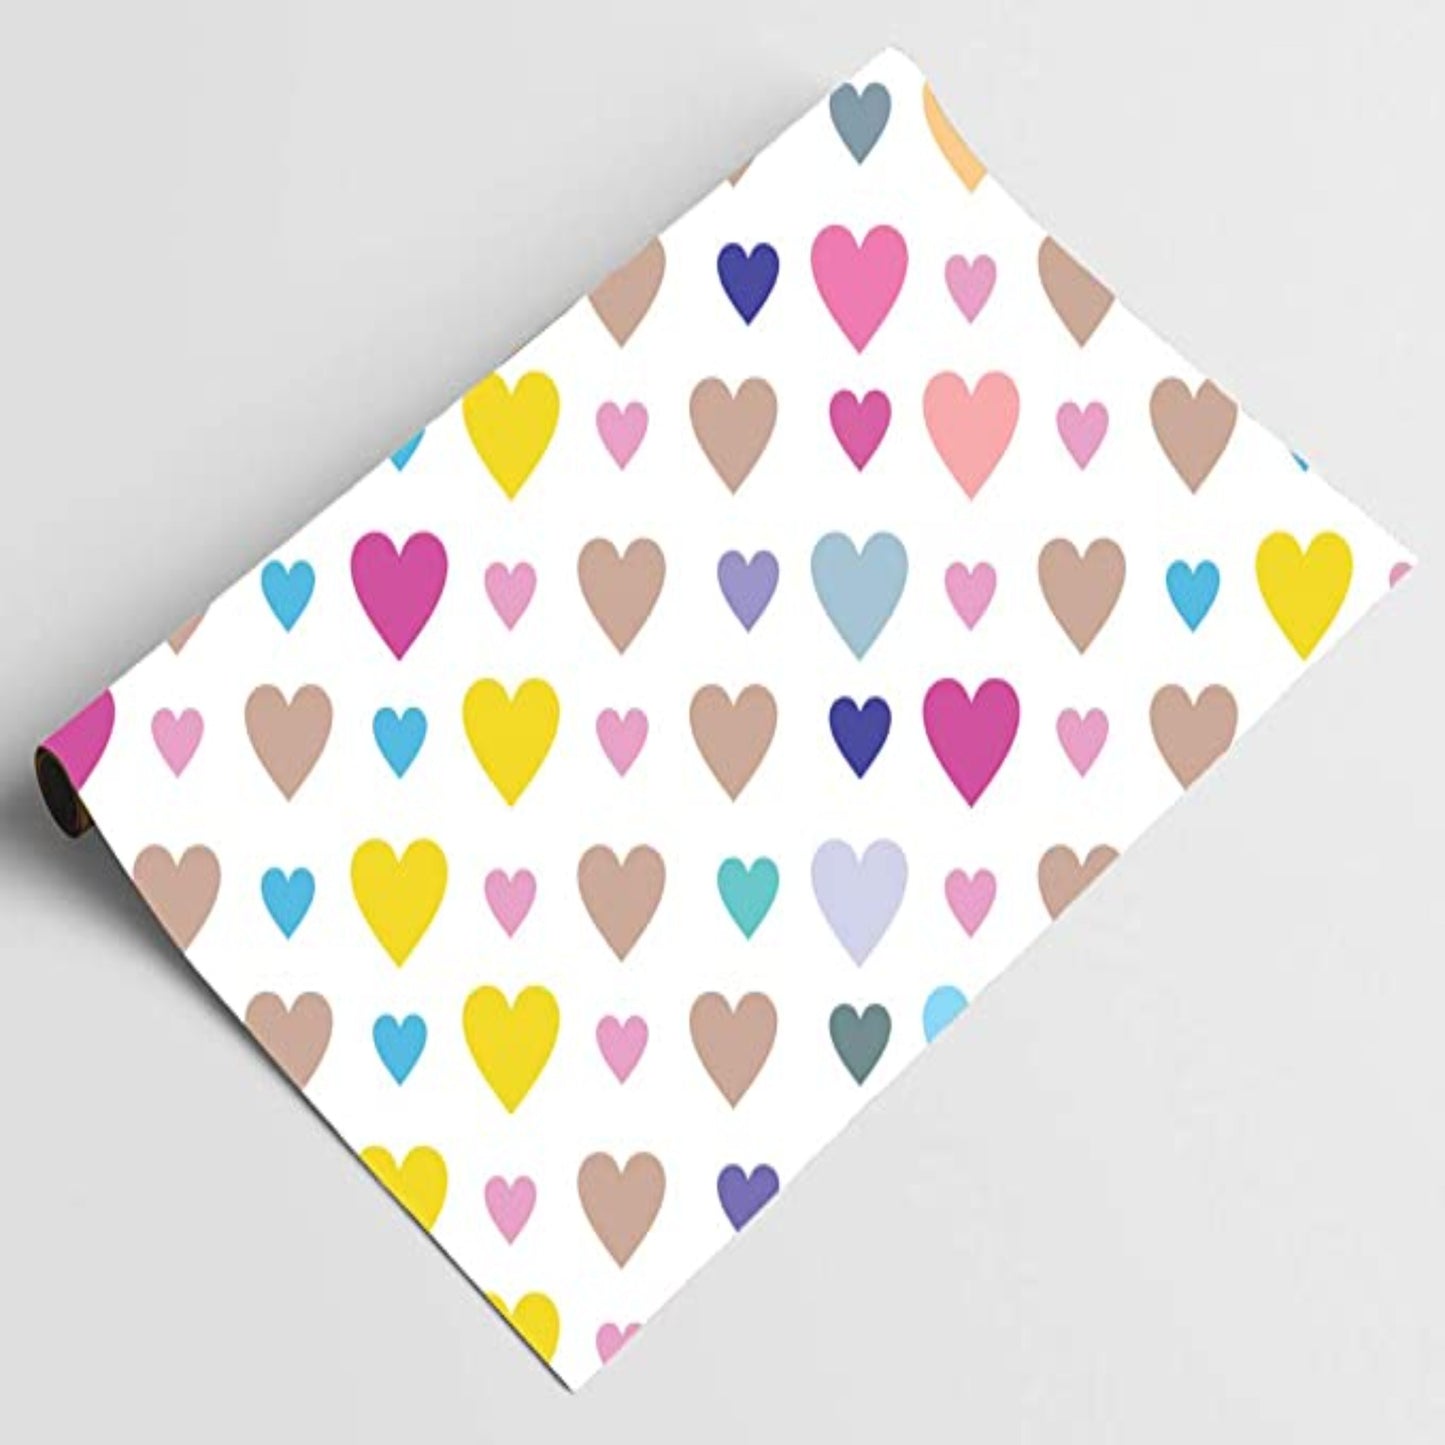 Accuprints  | Design Heart Shape | Size 18 X 25 inch Wrapping Paper Sheets for Birthday Gift